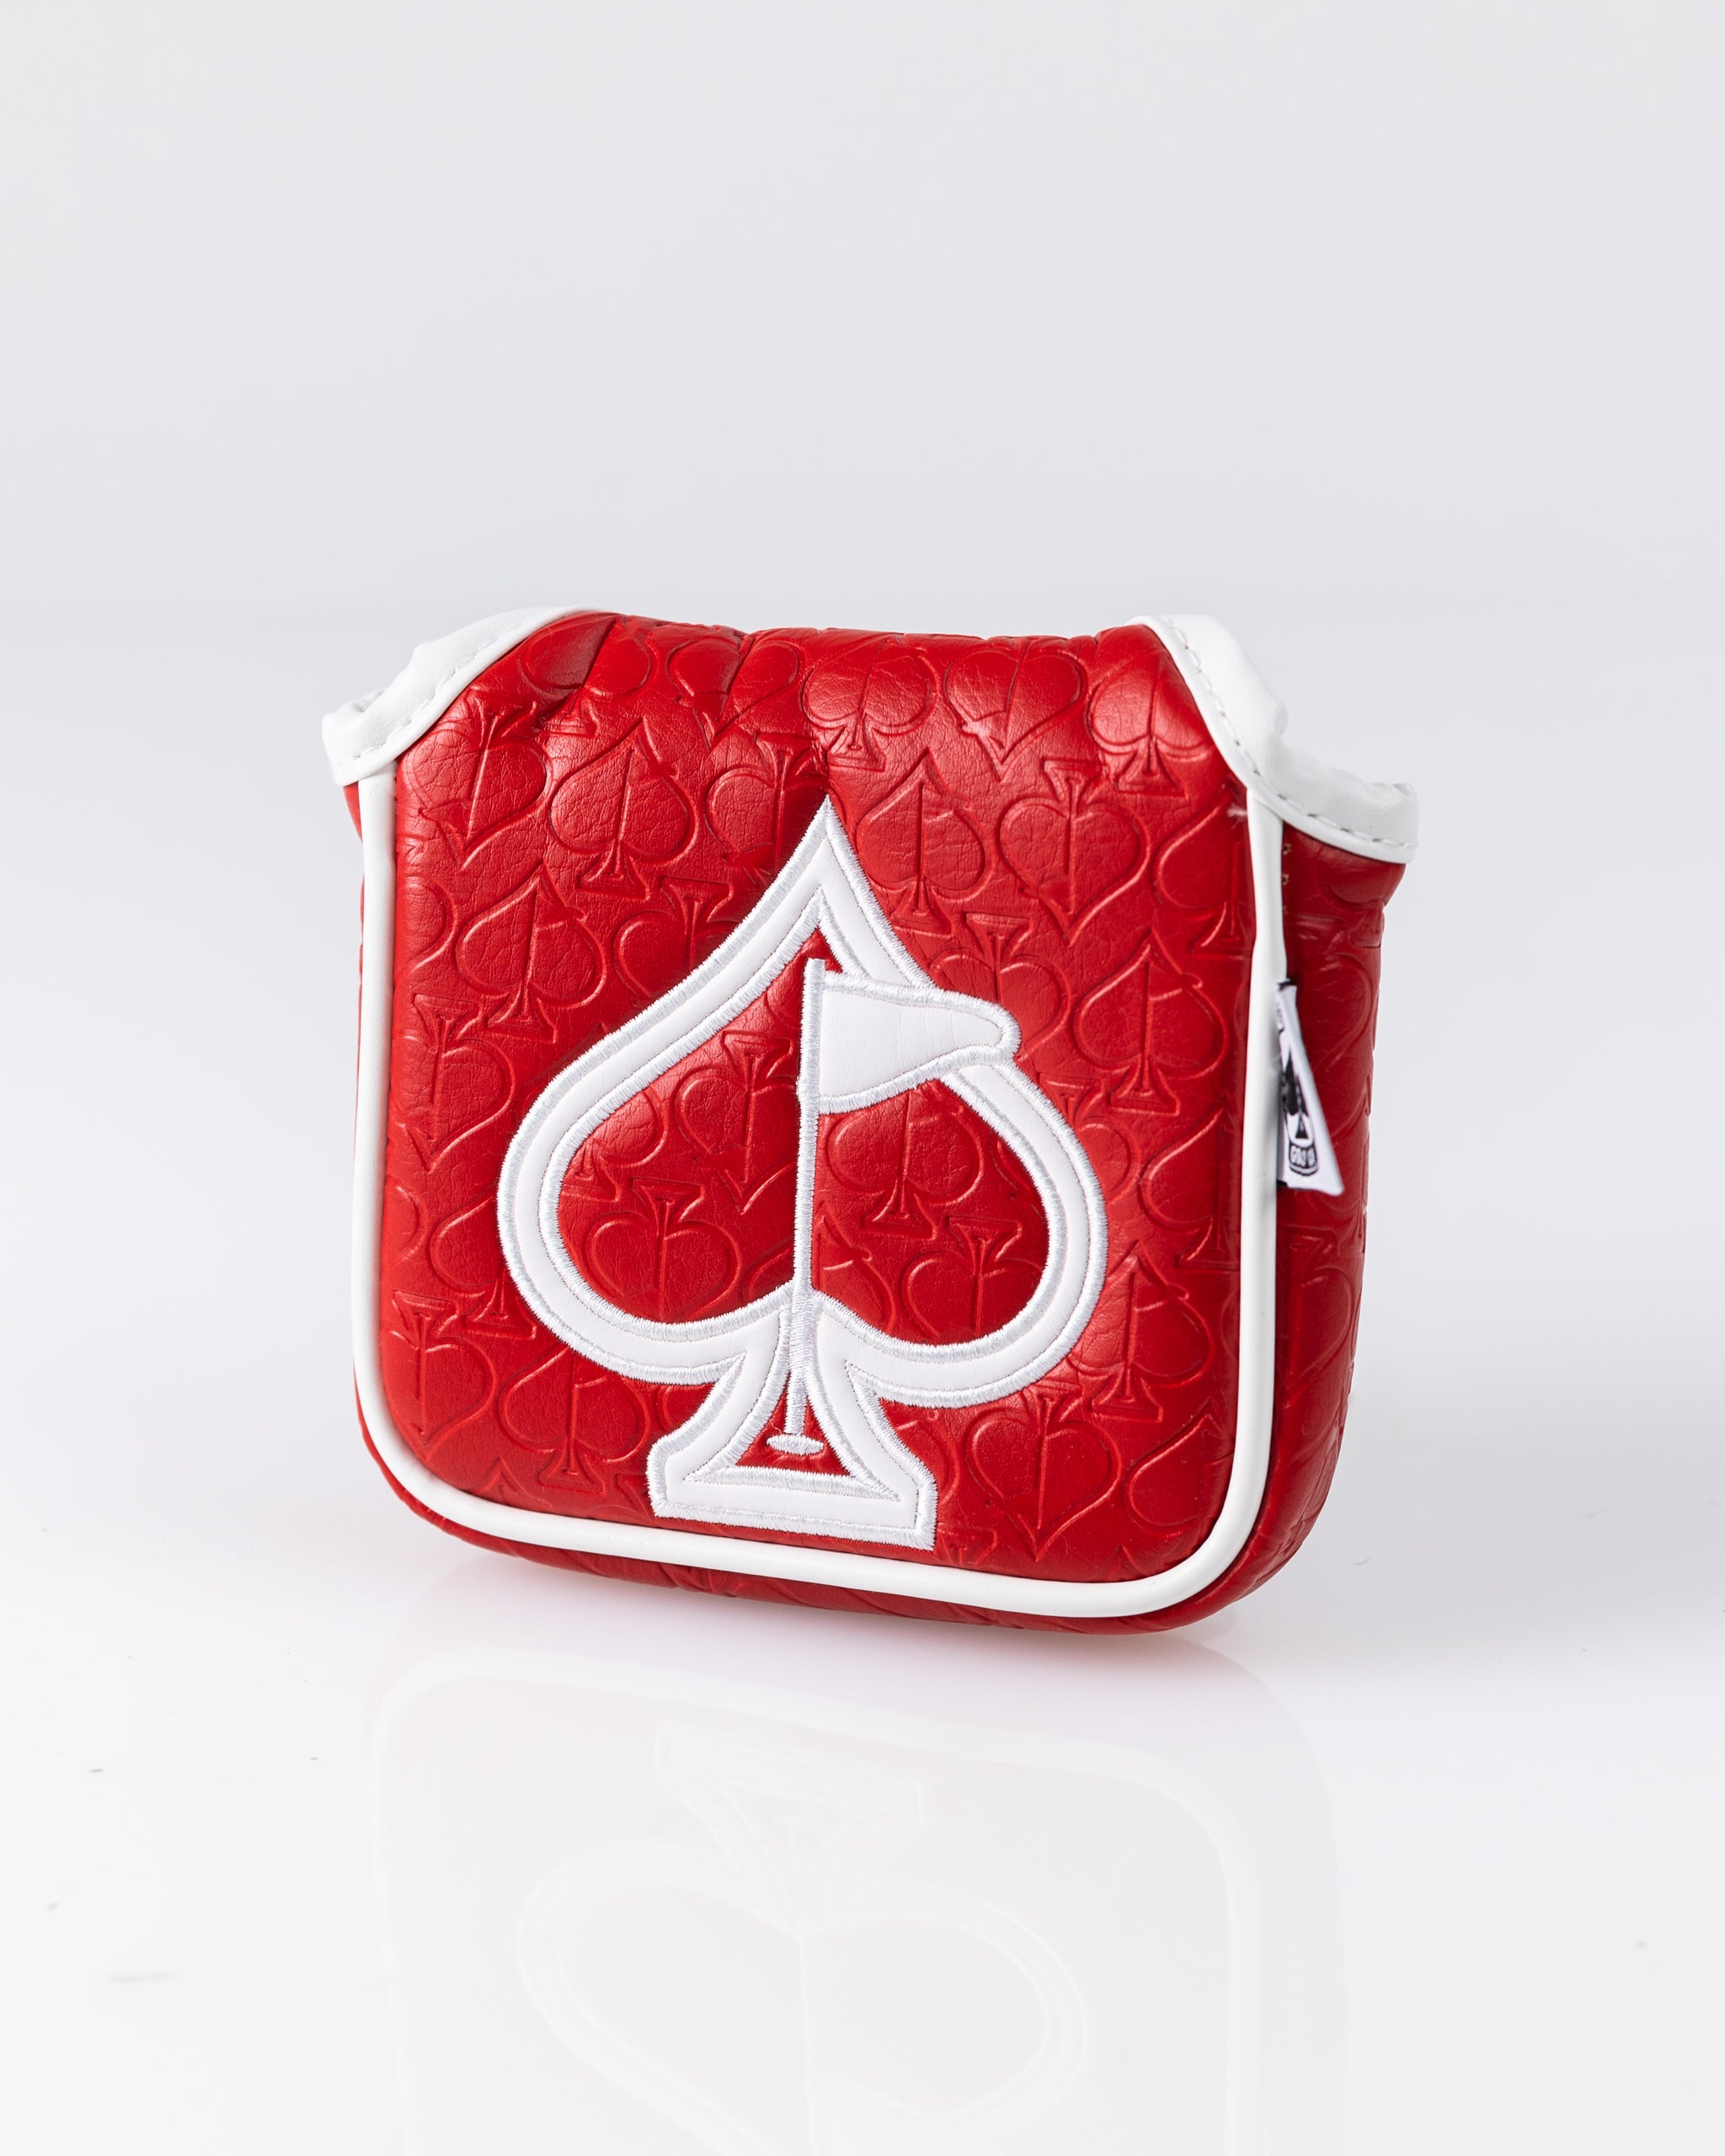 Embossed Spade Mallet Putter Cover - Red